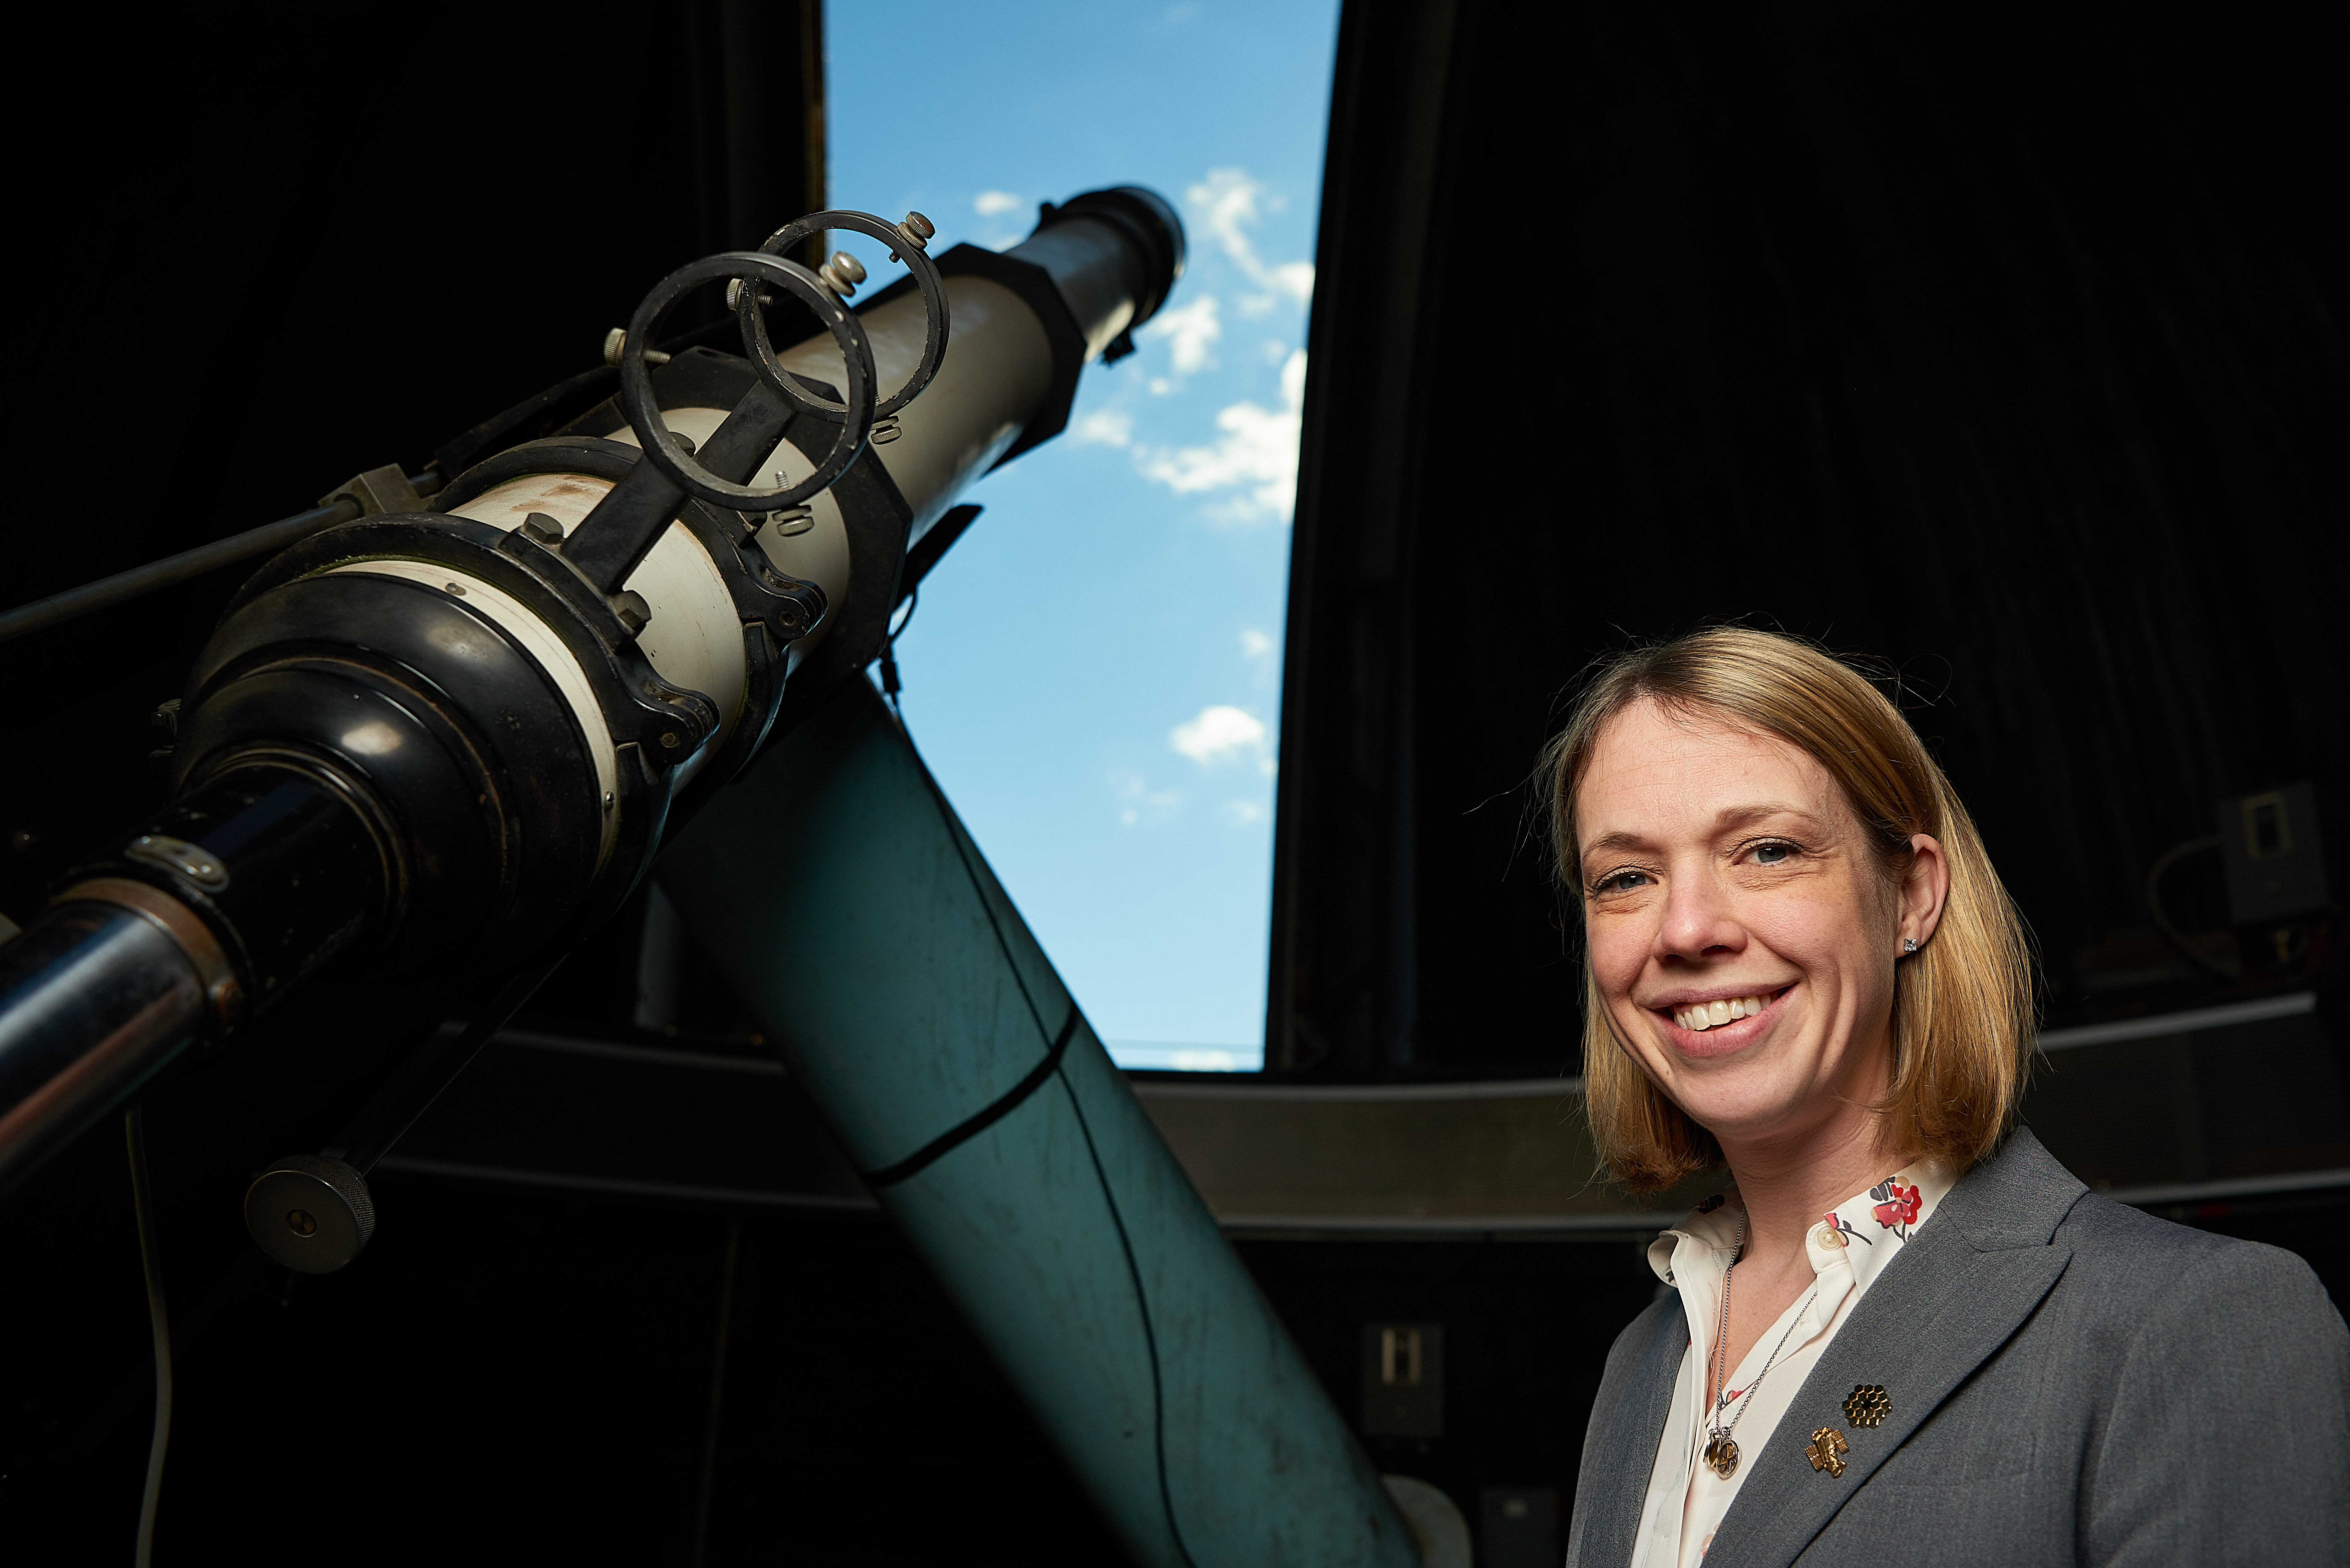 Kate Whitaker, assistant professor of physics, stands next to a telescope inside the observatory on top of the Gant Complex on Feb. 14, 2019. (Peter Morenus/UConn Photo)